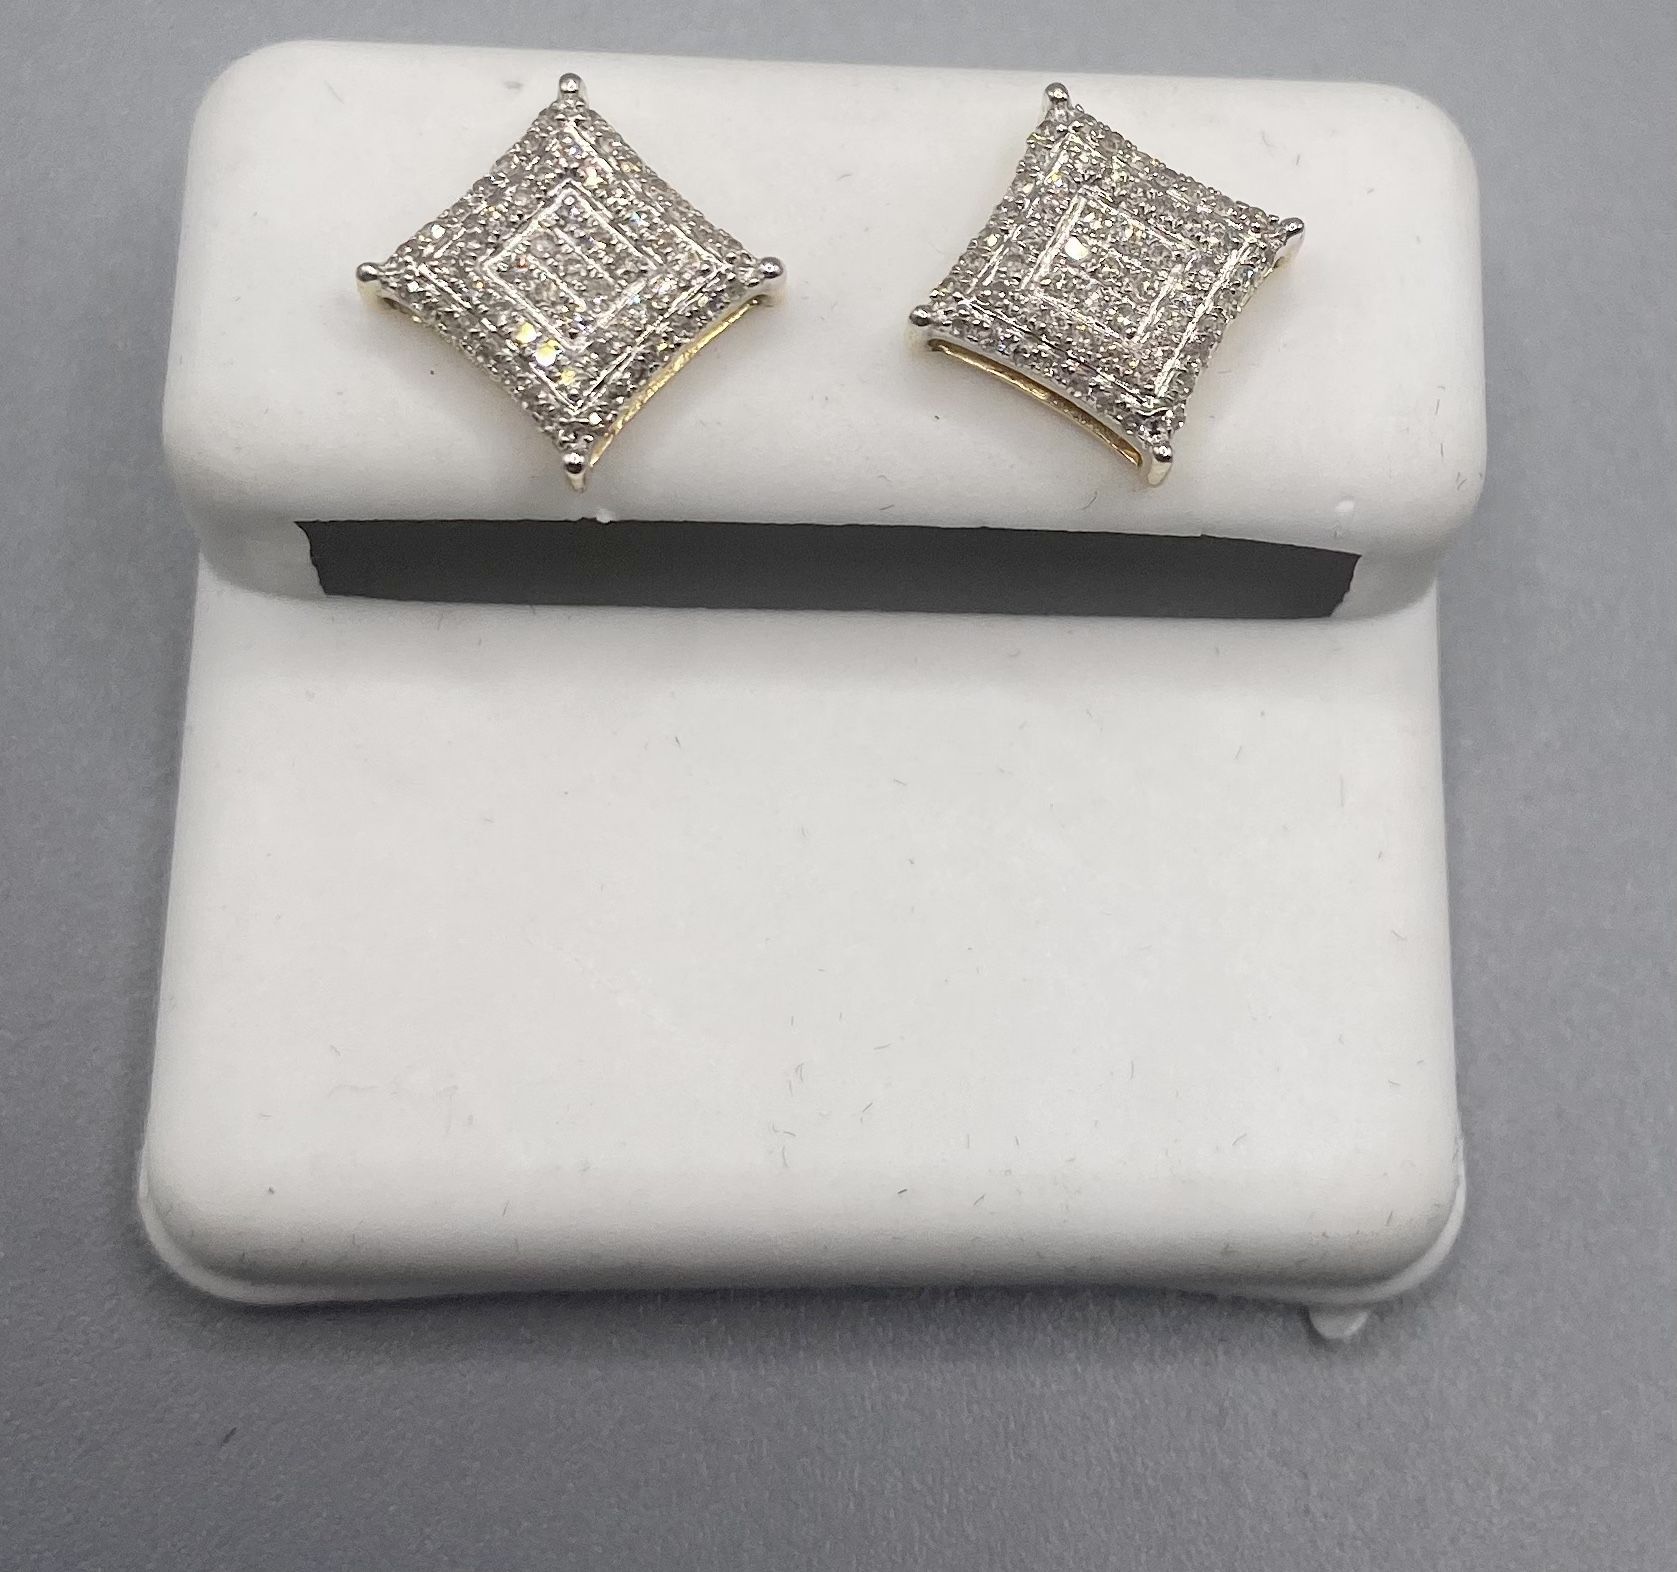 10kt Gold With Diamond Earrings 0.30 CTW